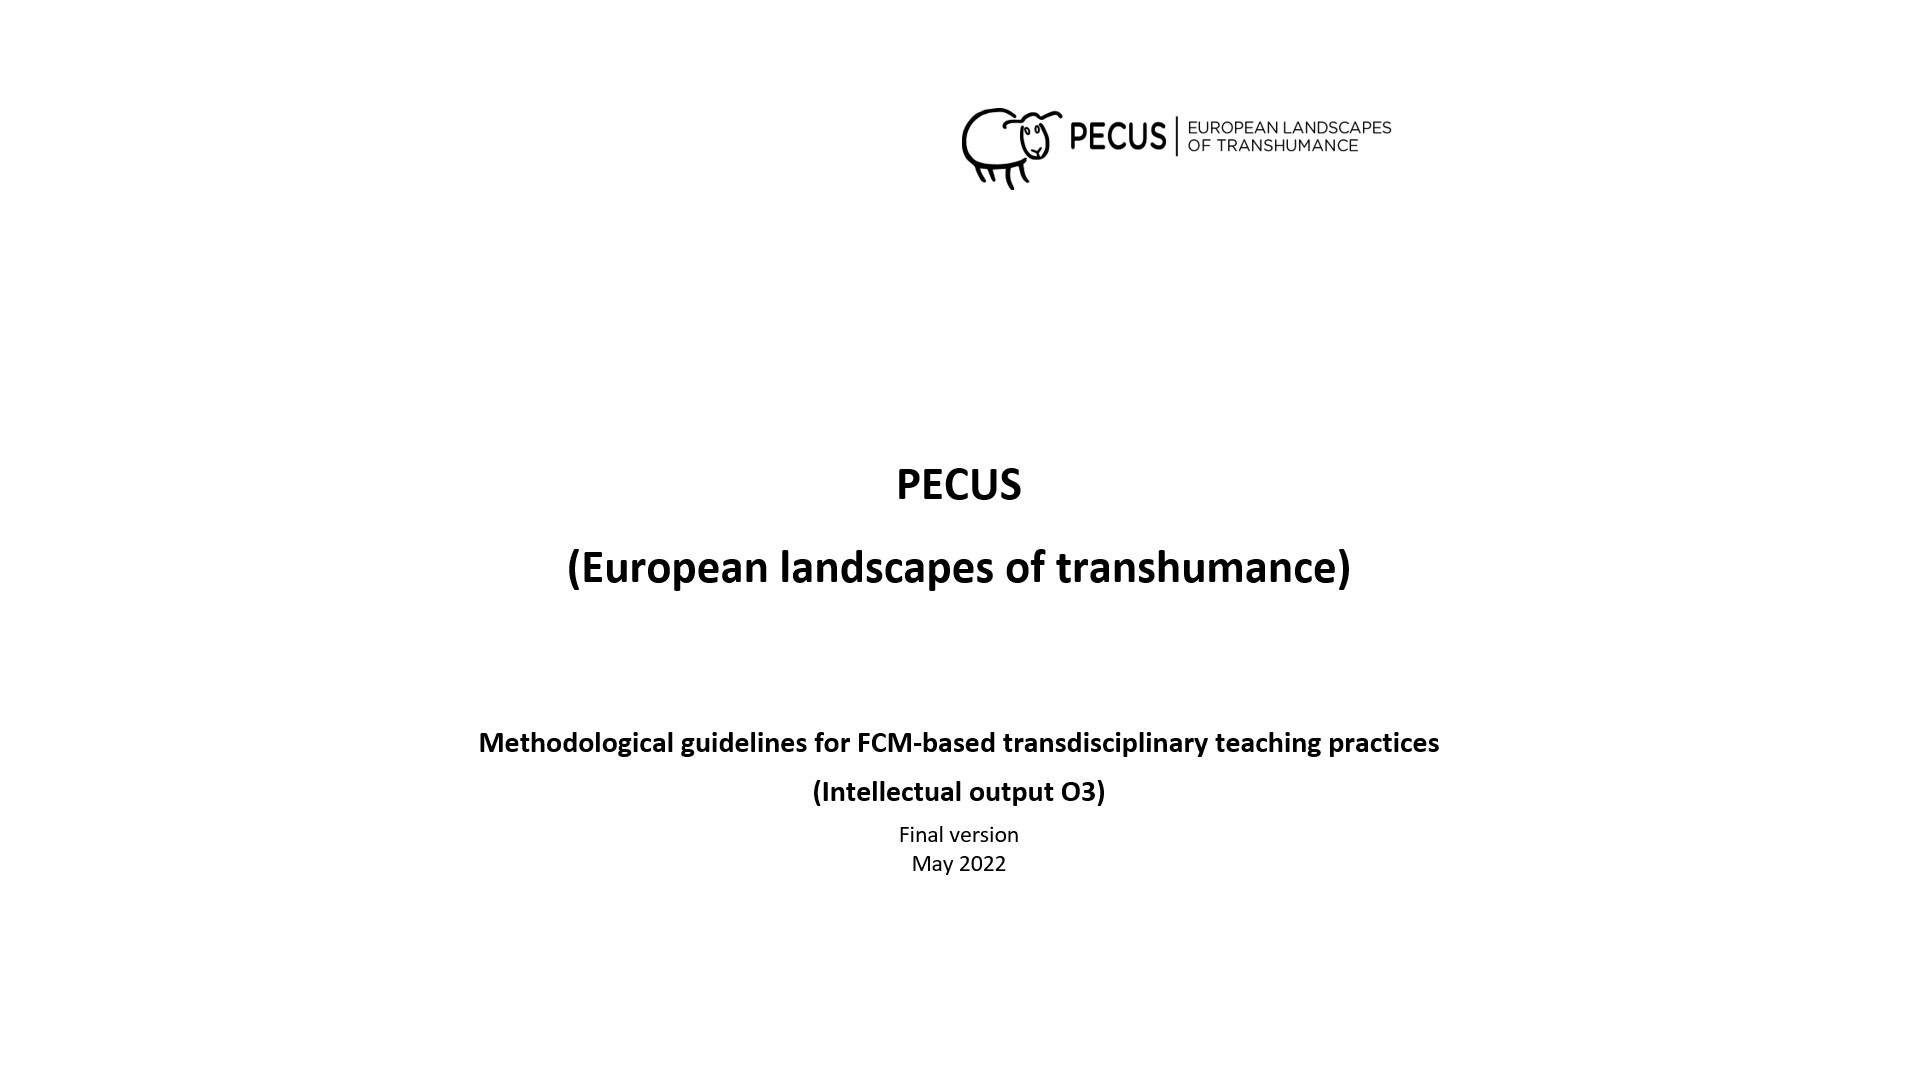 Methodological guidelines for FCM-based transdisciplinary teaching practices